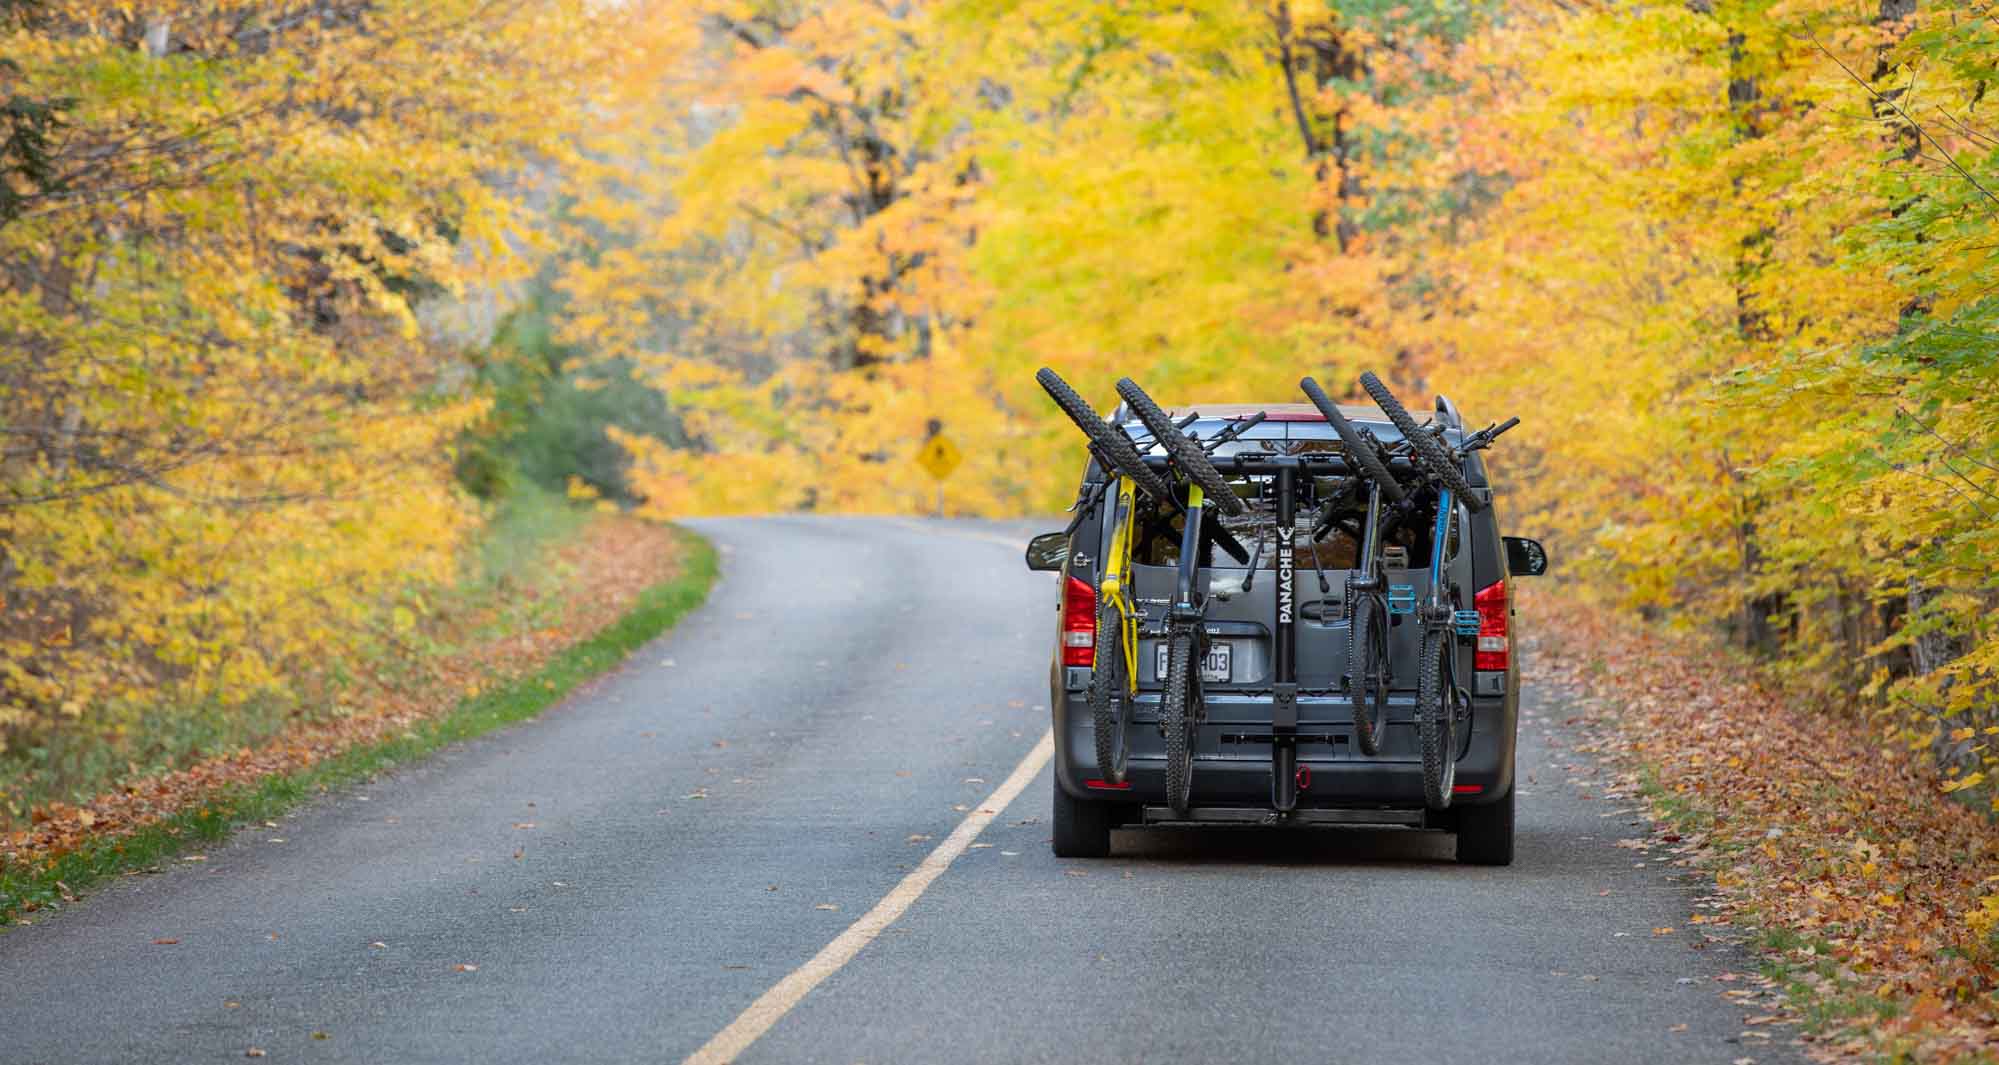 Mini van on a small country road with nice Fall colors equiped with a Panache Rack T4 bike rack carrying 4 bikes.